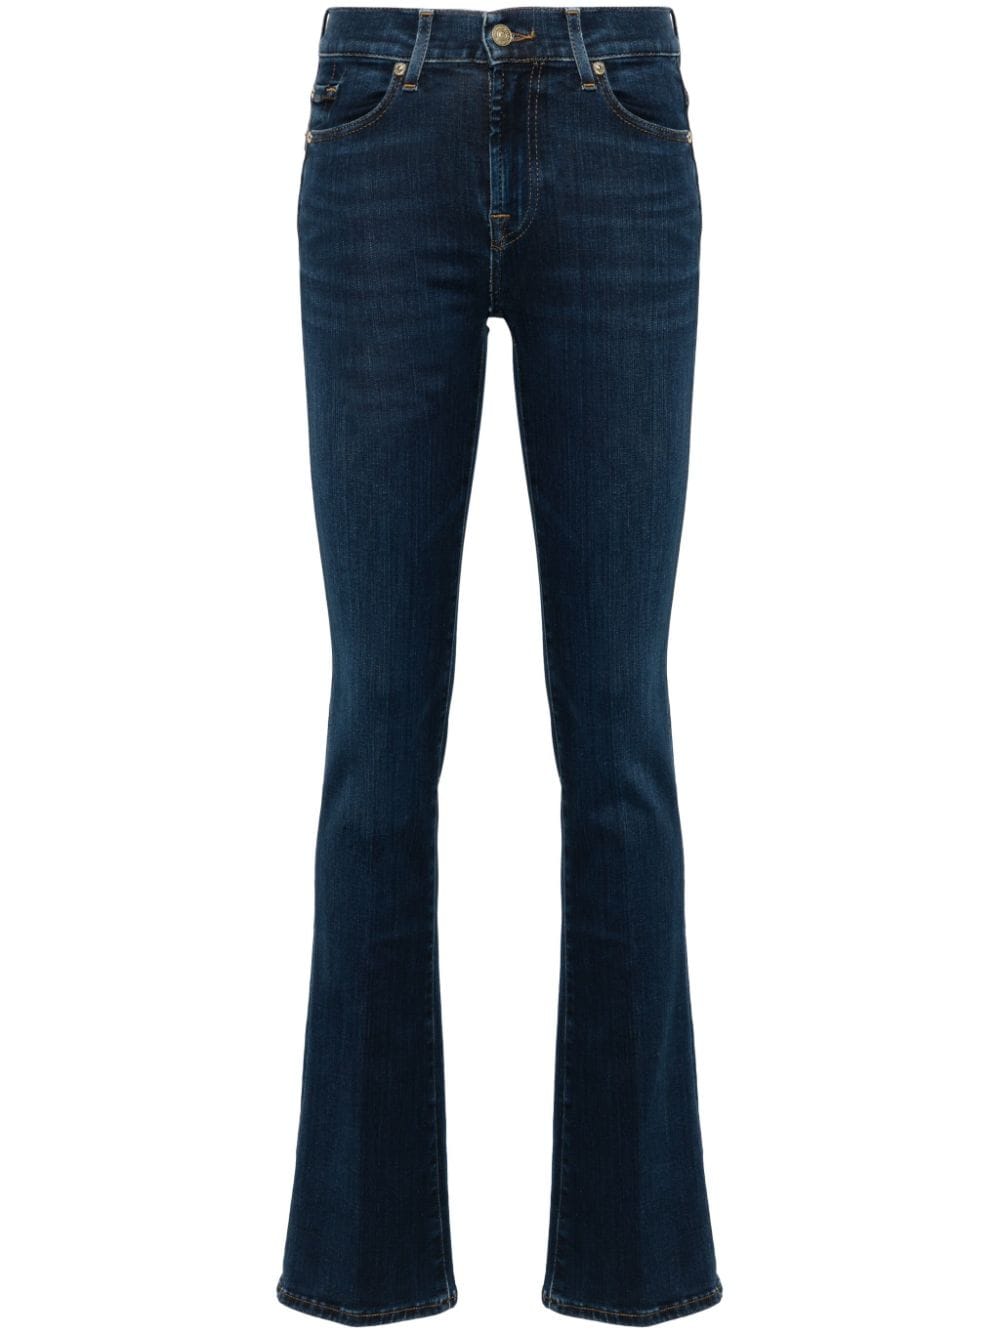 7 For All Mankind mid-rise bootcut jeans - Blue von 7 For All Mankind